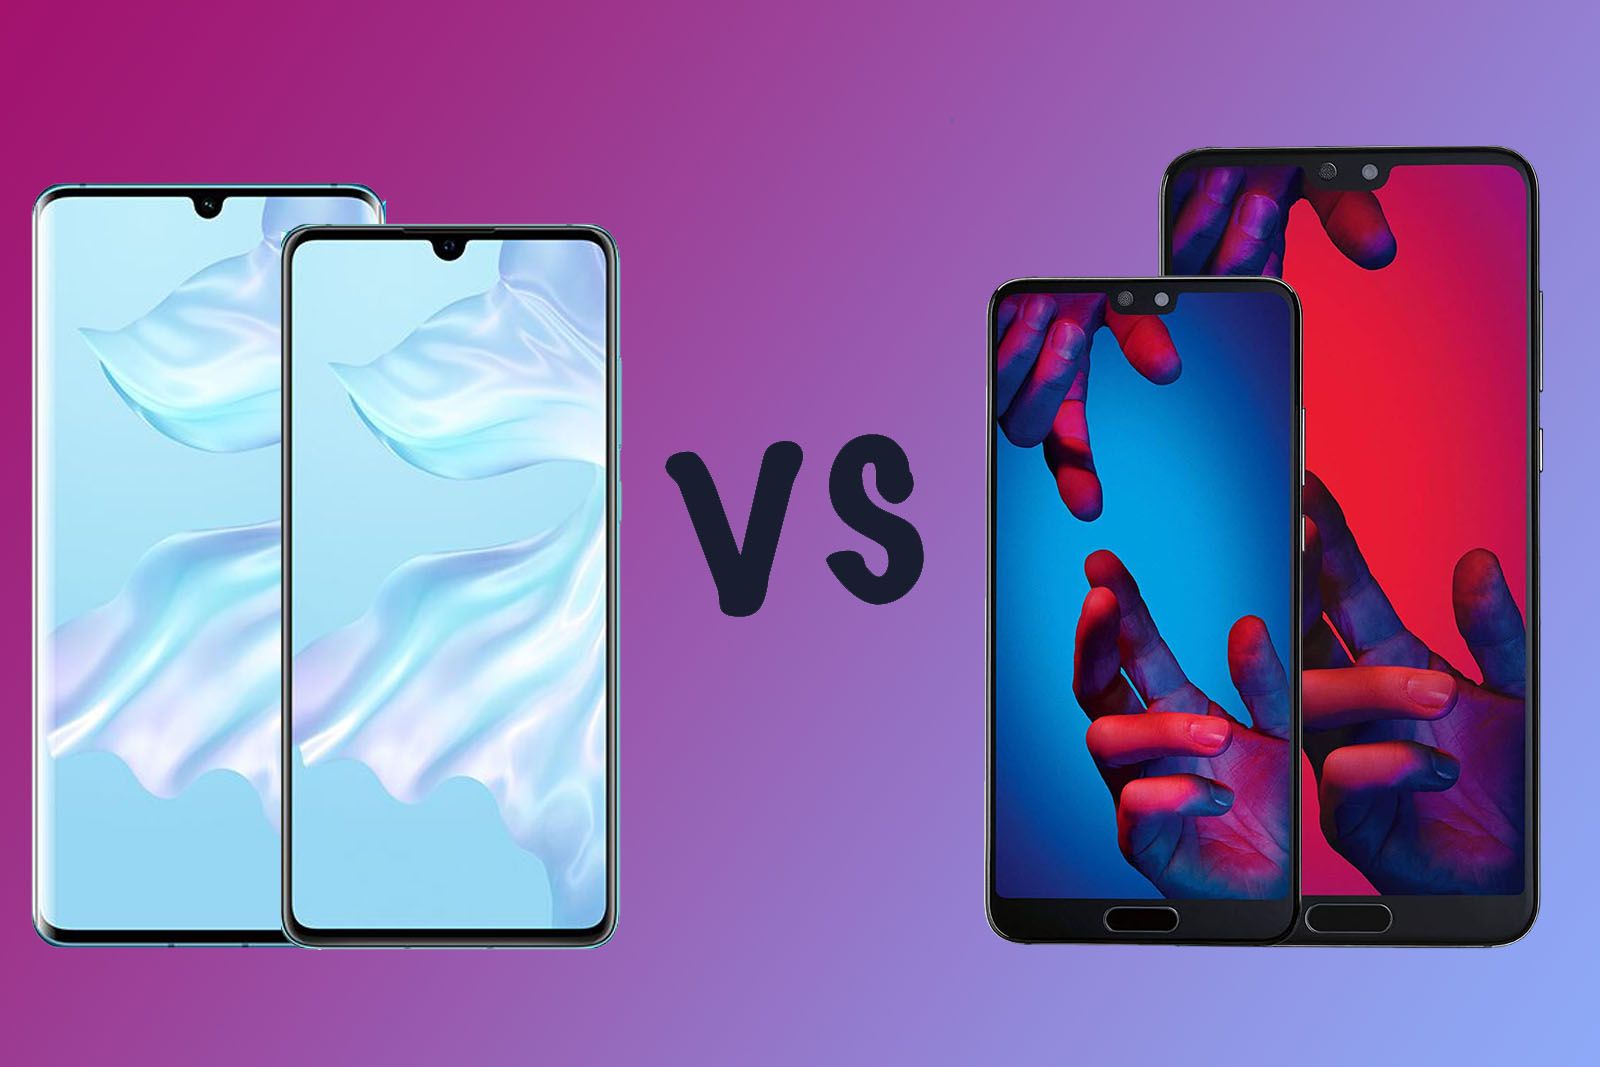 Huawei P30 vs Huawei P20 Whats the difference image 1